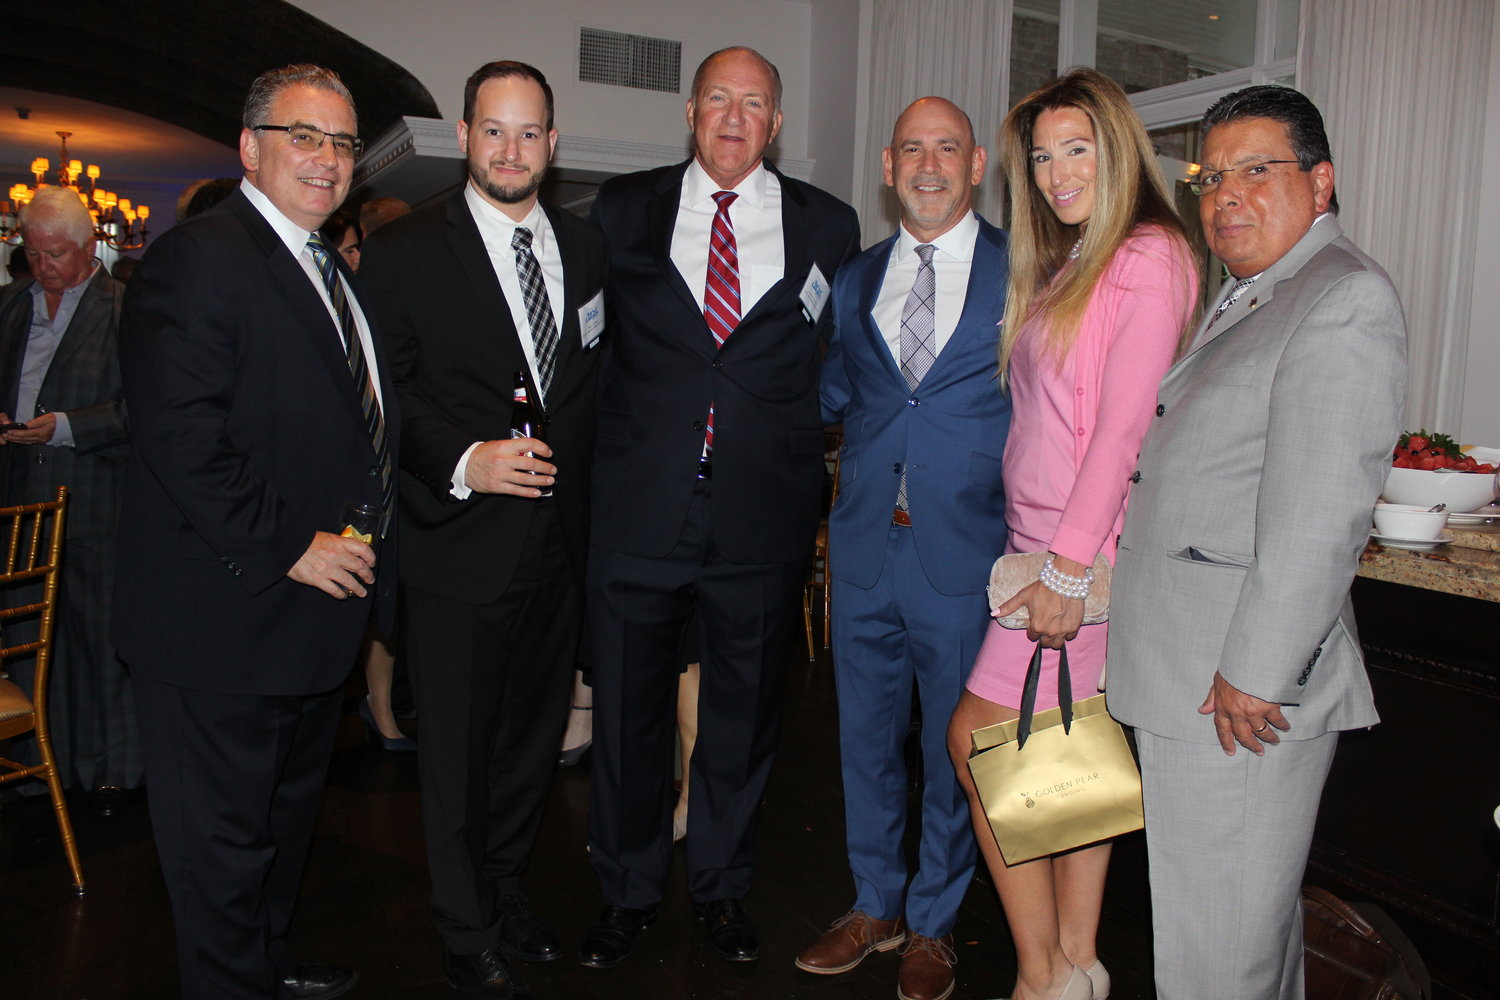 Mingling at the networking and cocktail party were, from left, Brett Harrison, Honoree Ross Kartez, Honoree Frederick Johs, Honoree Jeffrey Kimmel, Connie Henriquez and Frank Torres.